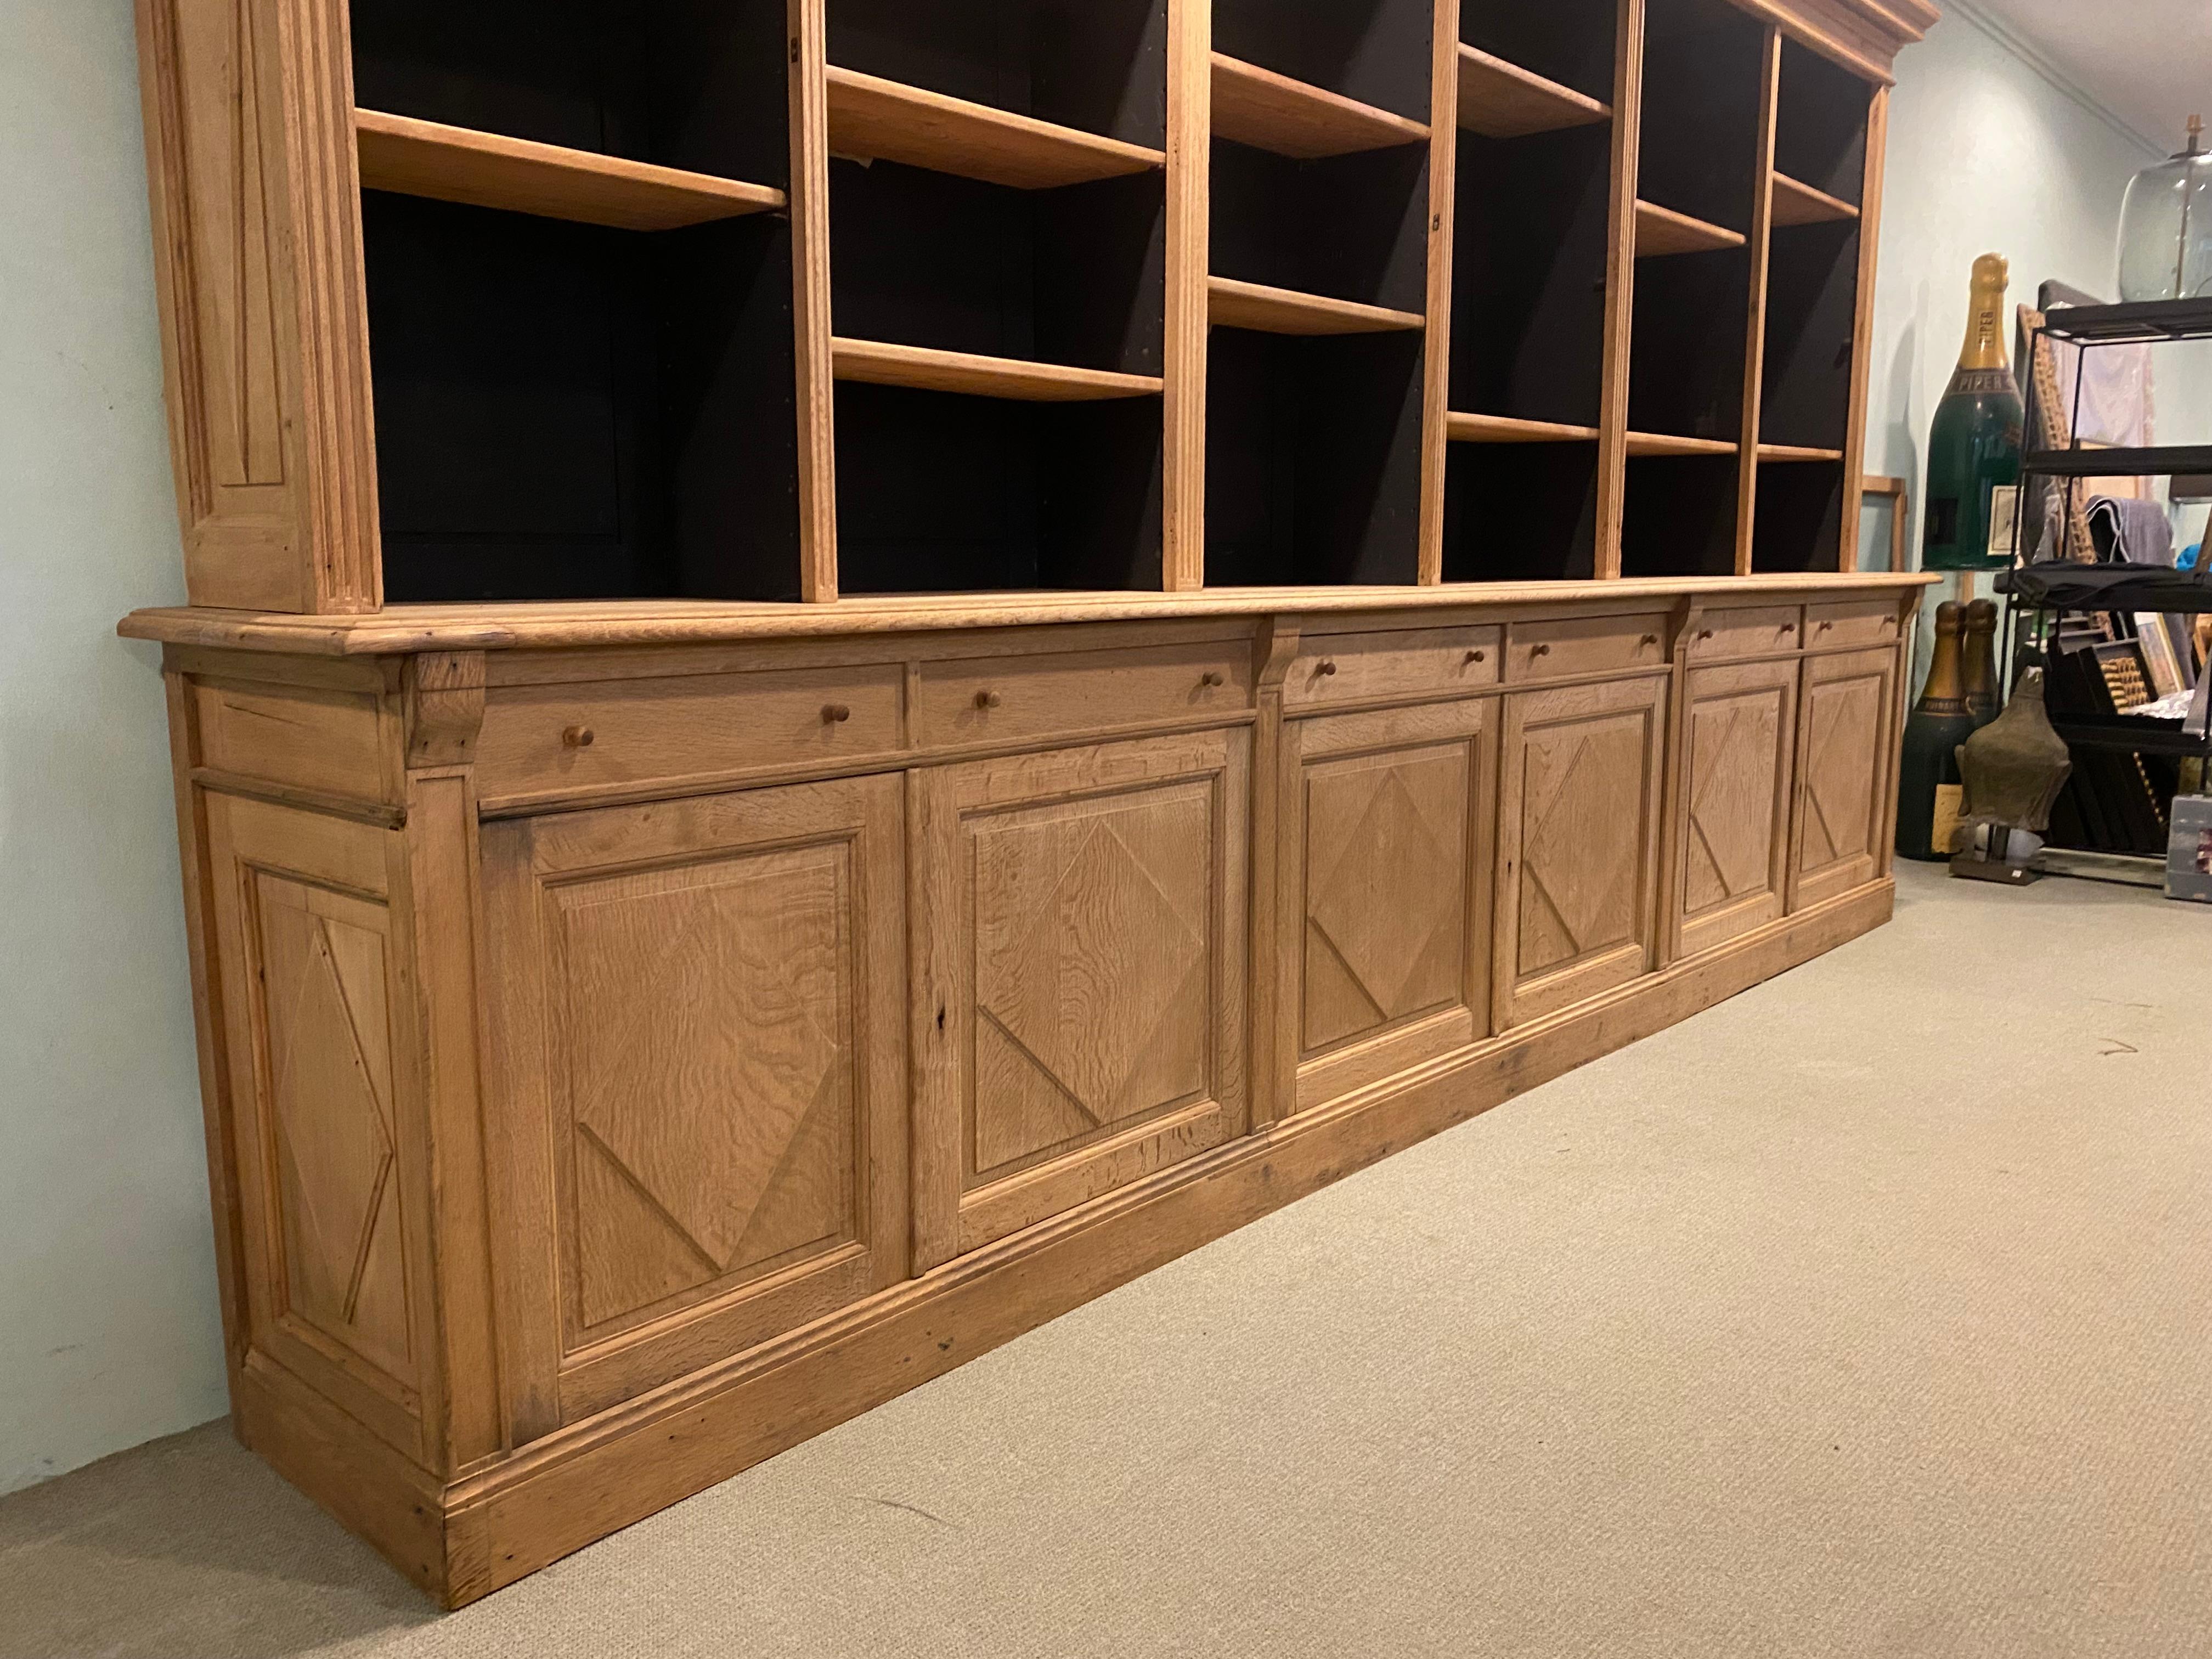 Rustic Antique Blond Oak Bookcase with Glazed Doors In Good Condition For Sale In Schellebelle, BE